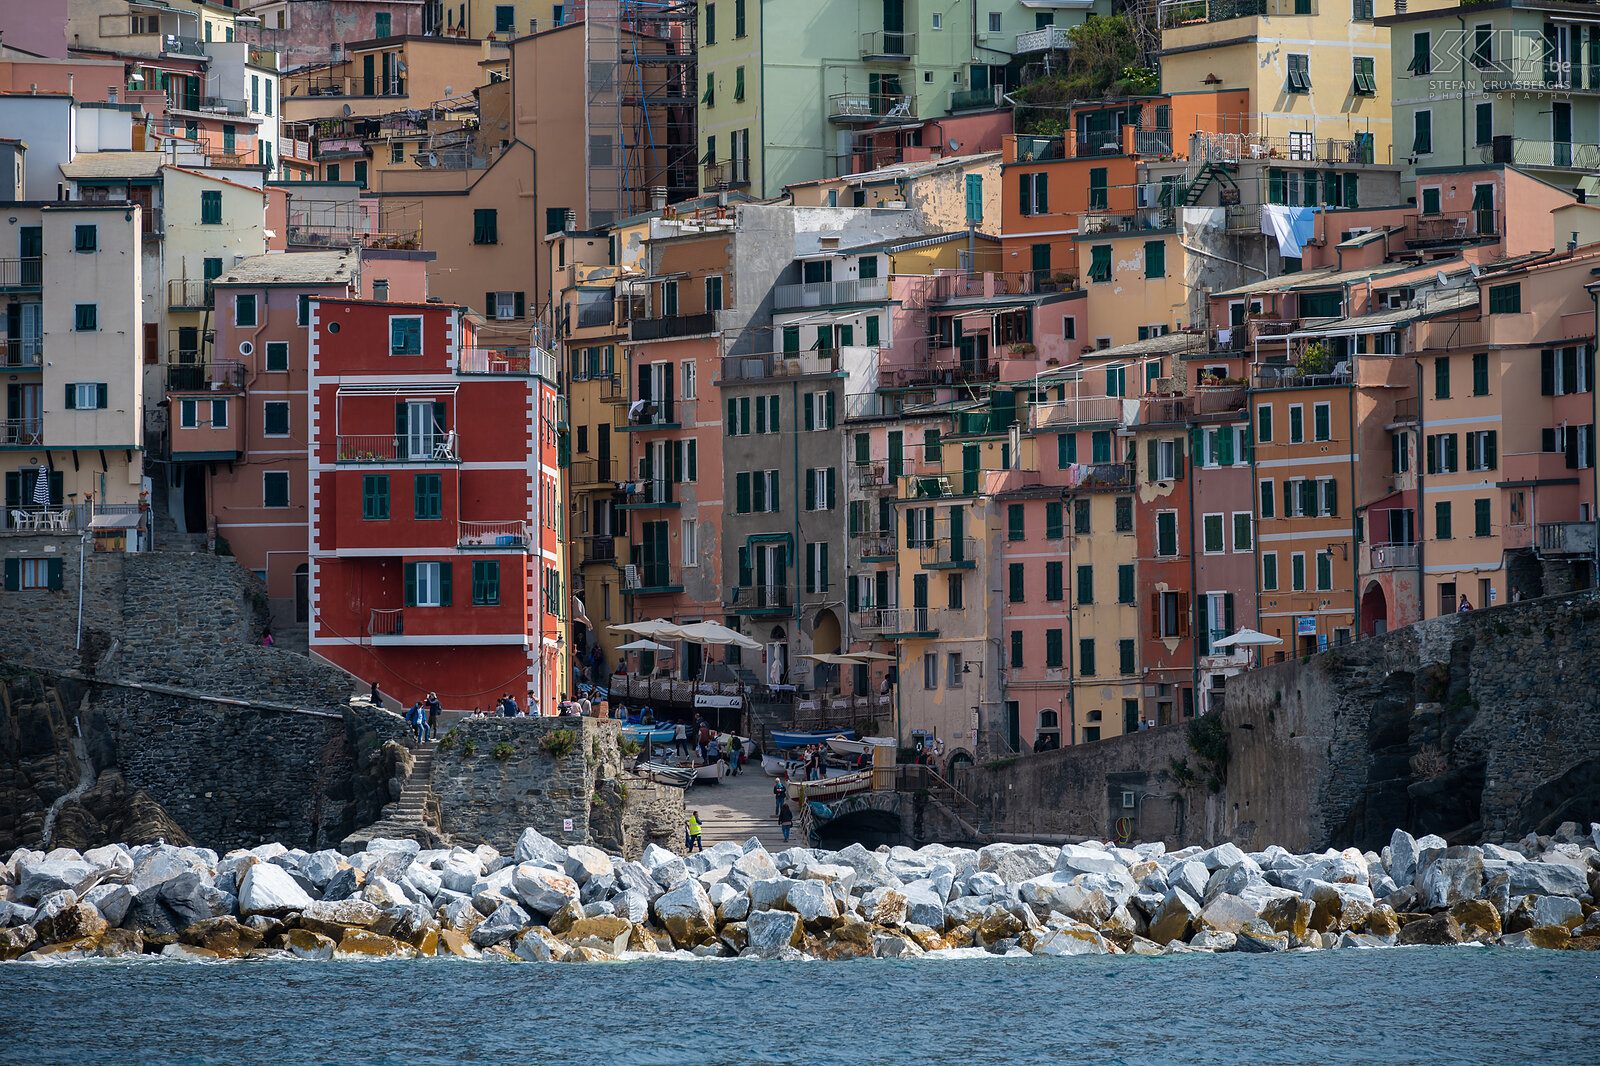 Riomaggiore Riomaggiore is the southernmost village. It is deeply incised between the hills, on which terraces have been laid out for agriculture. The houses have the typical Ligurian colors (red, pink, ochre) and lean against the slope. Riomaggiore has about 2,000 inhabitants, making it the largest village together with Monterosso. The village dates back to the twelfth century. Stefan Cruysberghs